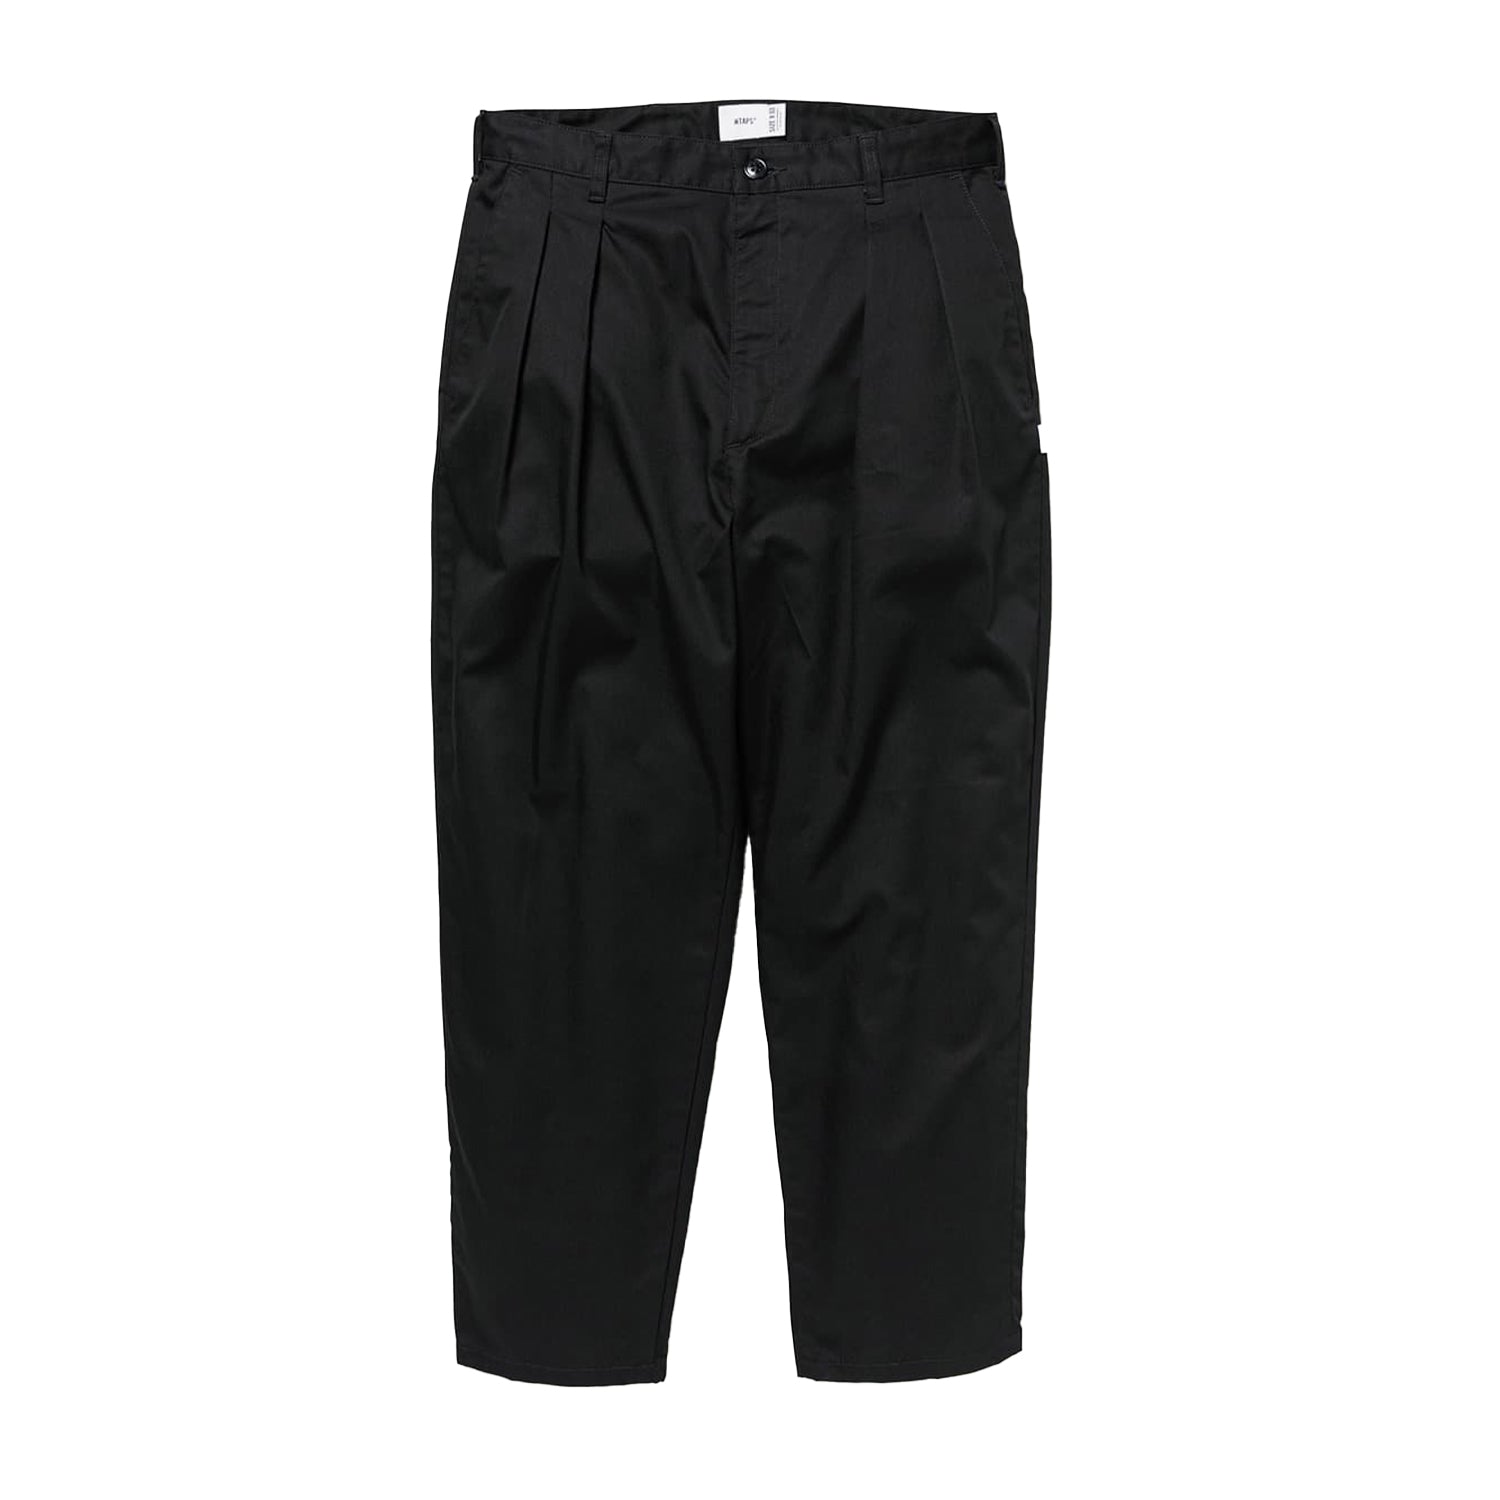 TRDT1802 / Trousers / CTPL. Twill - INVINCIBLE